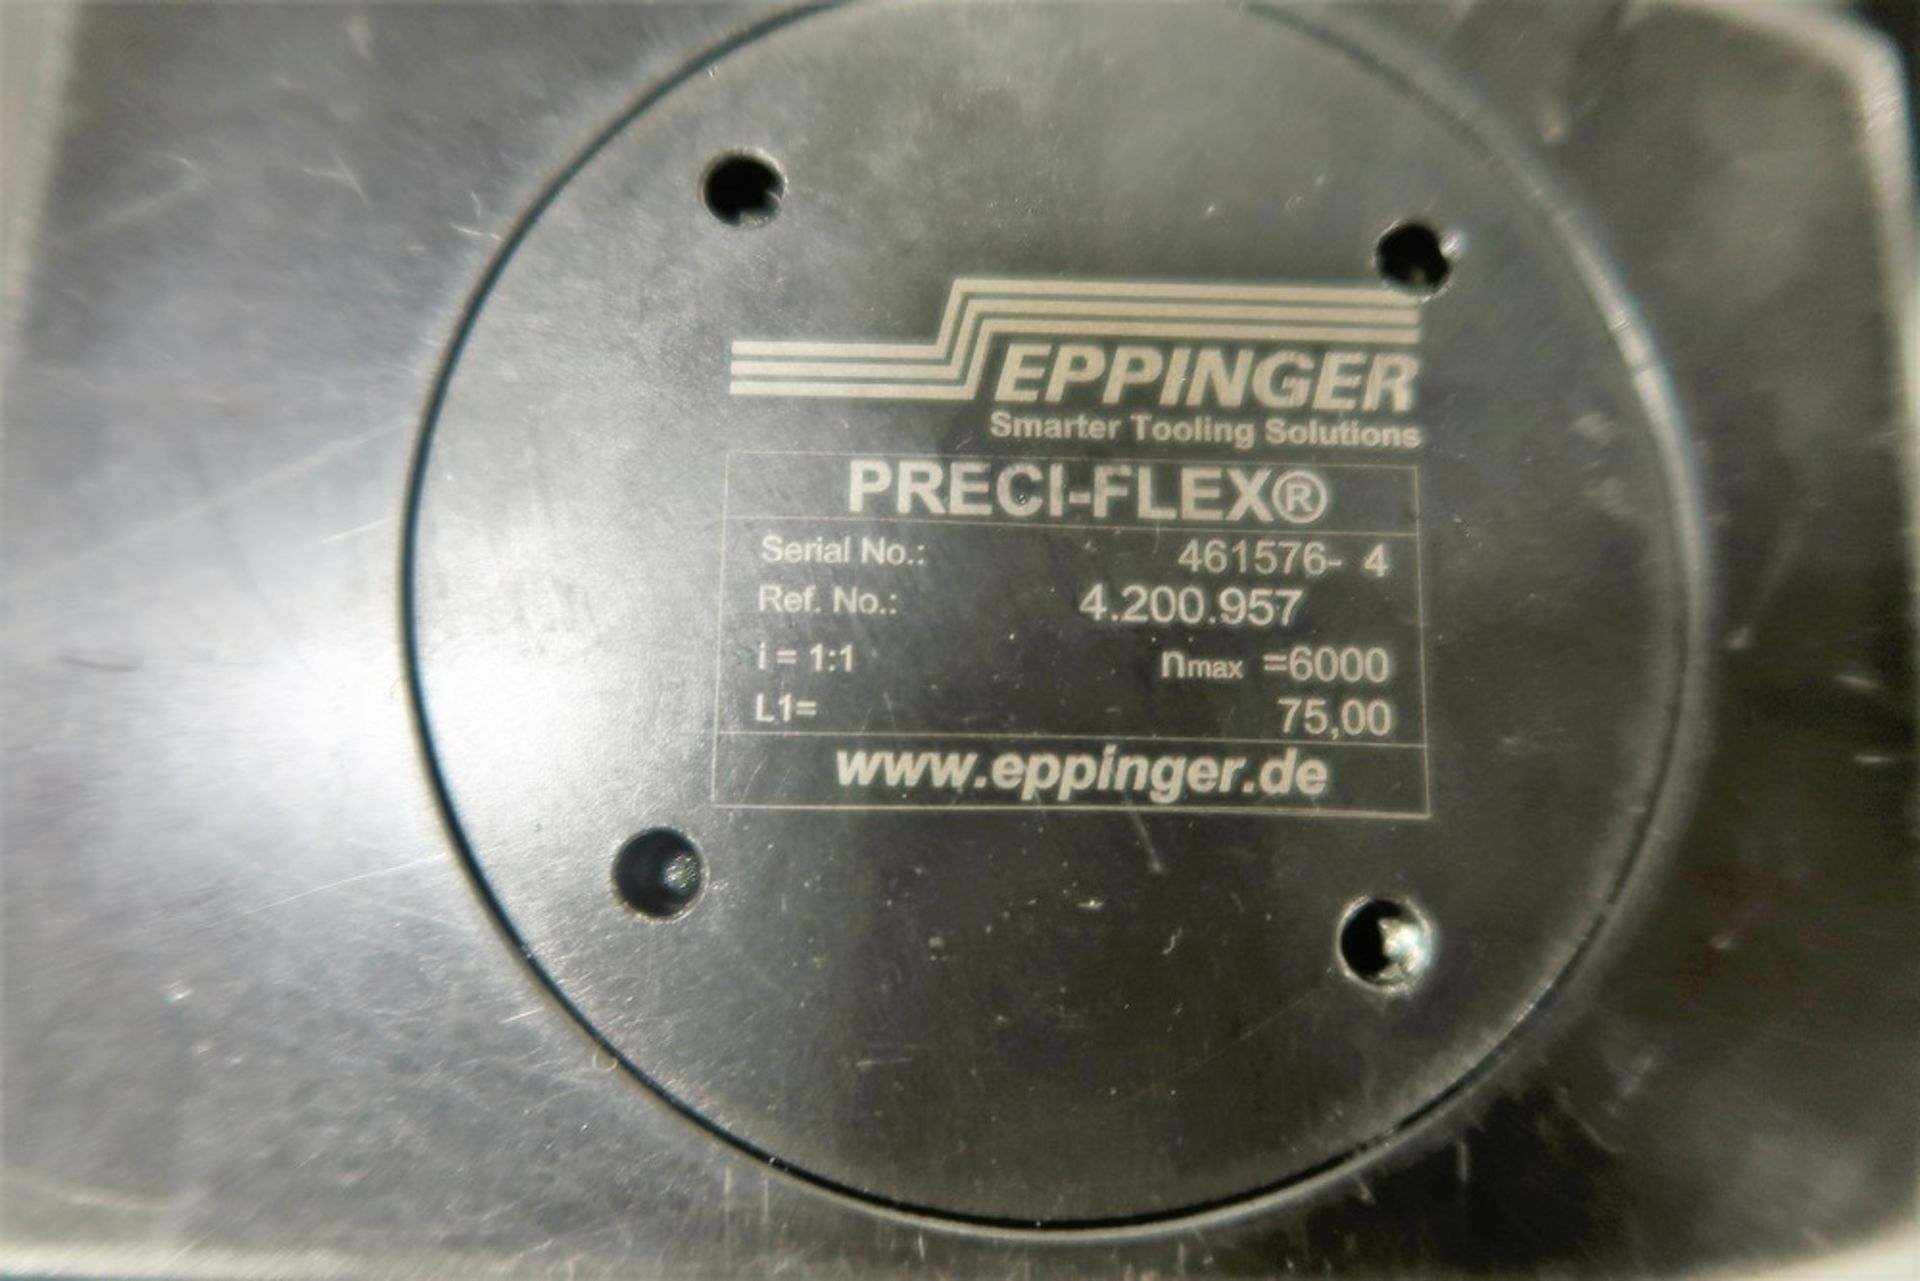 EPPINGER PRECI-FLEX MDL 4.200.957 RIGHT ANGLE LIVE TOOL FOR HAAS CNC LATHE - Image 2 of 2